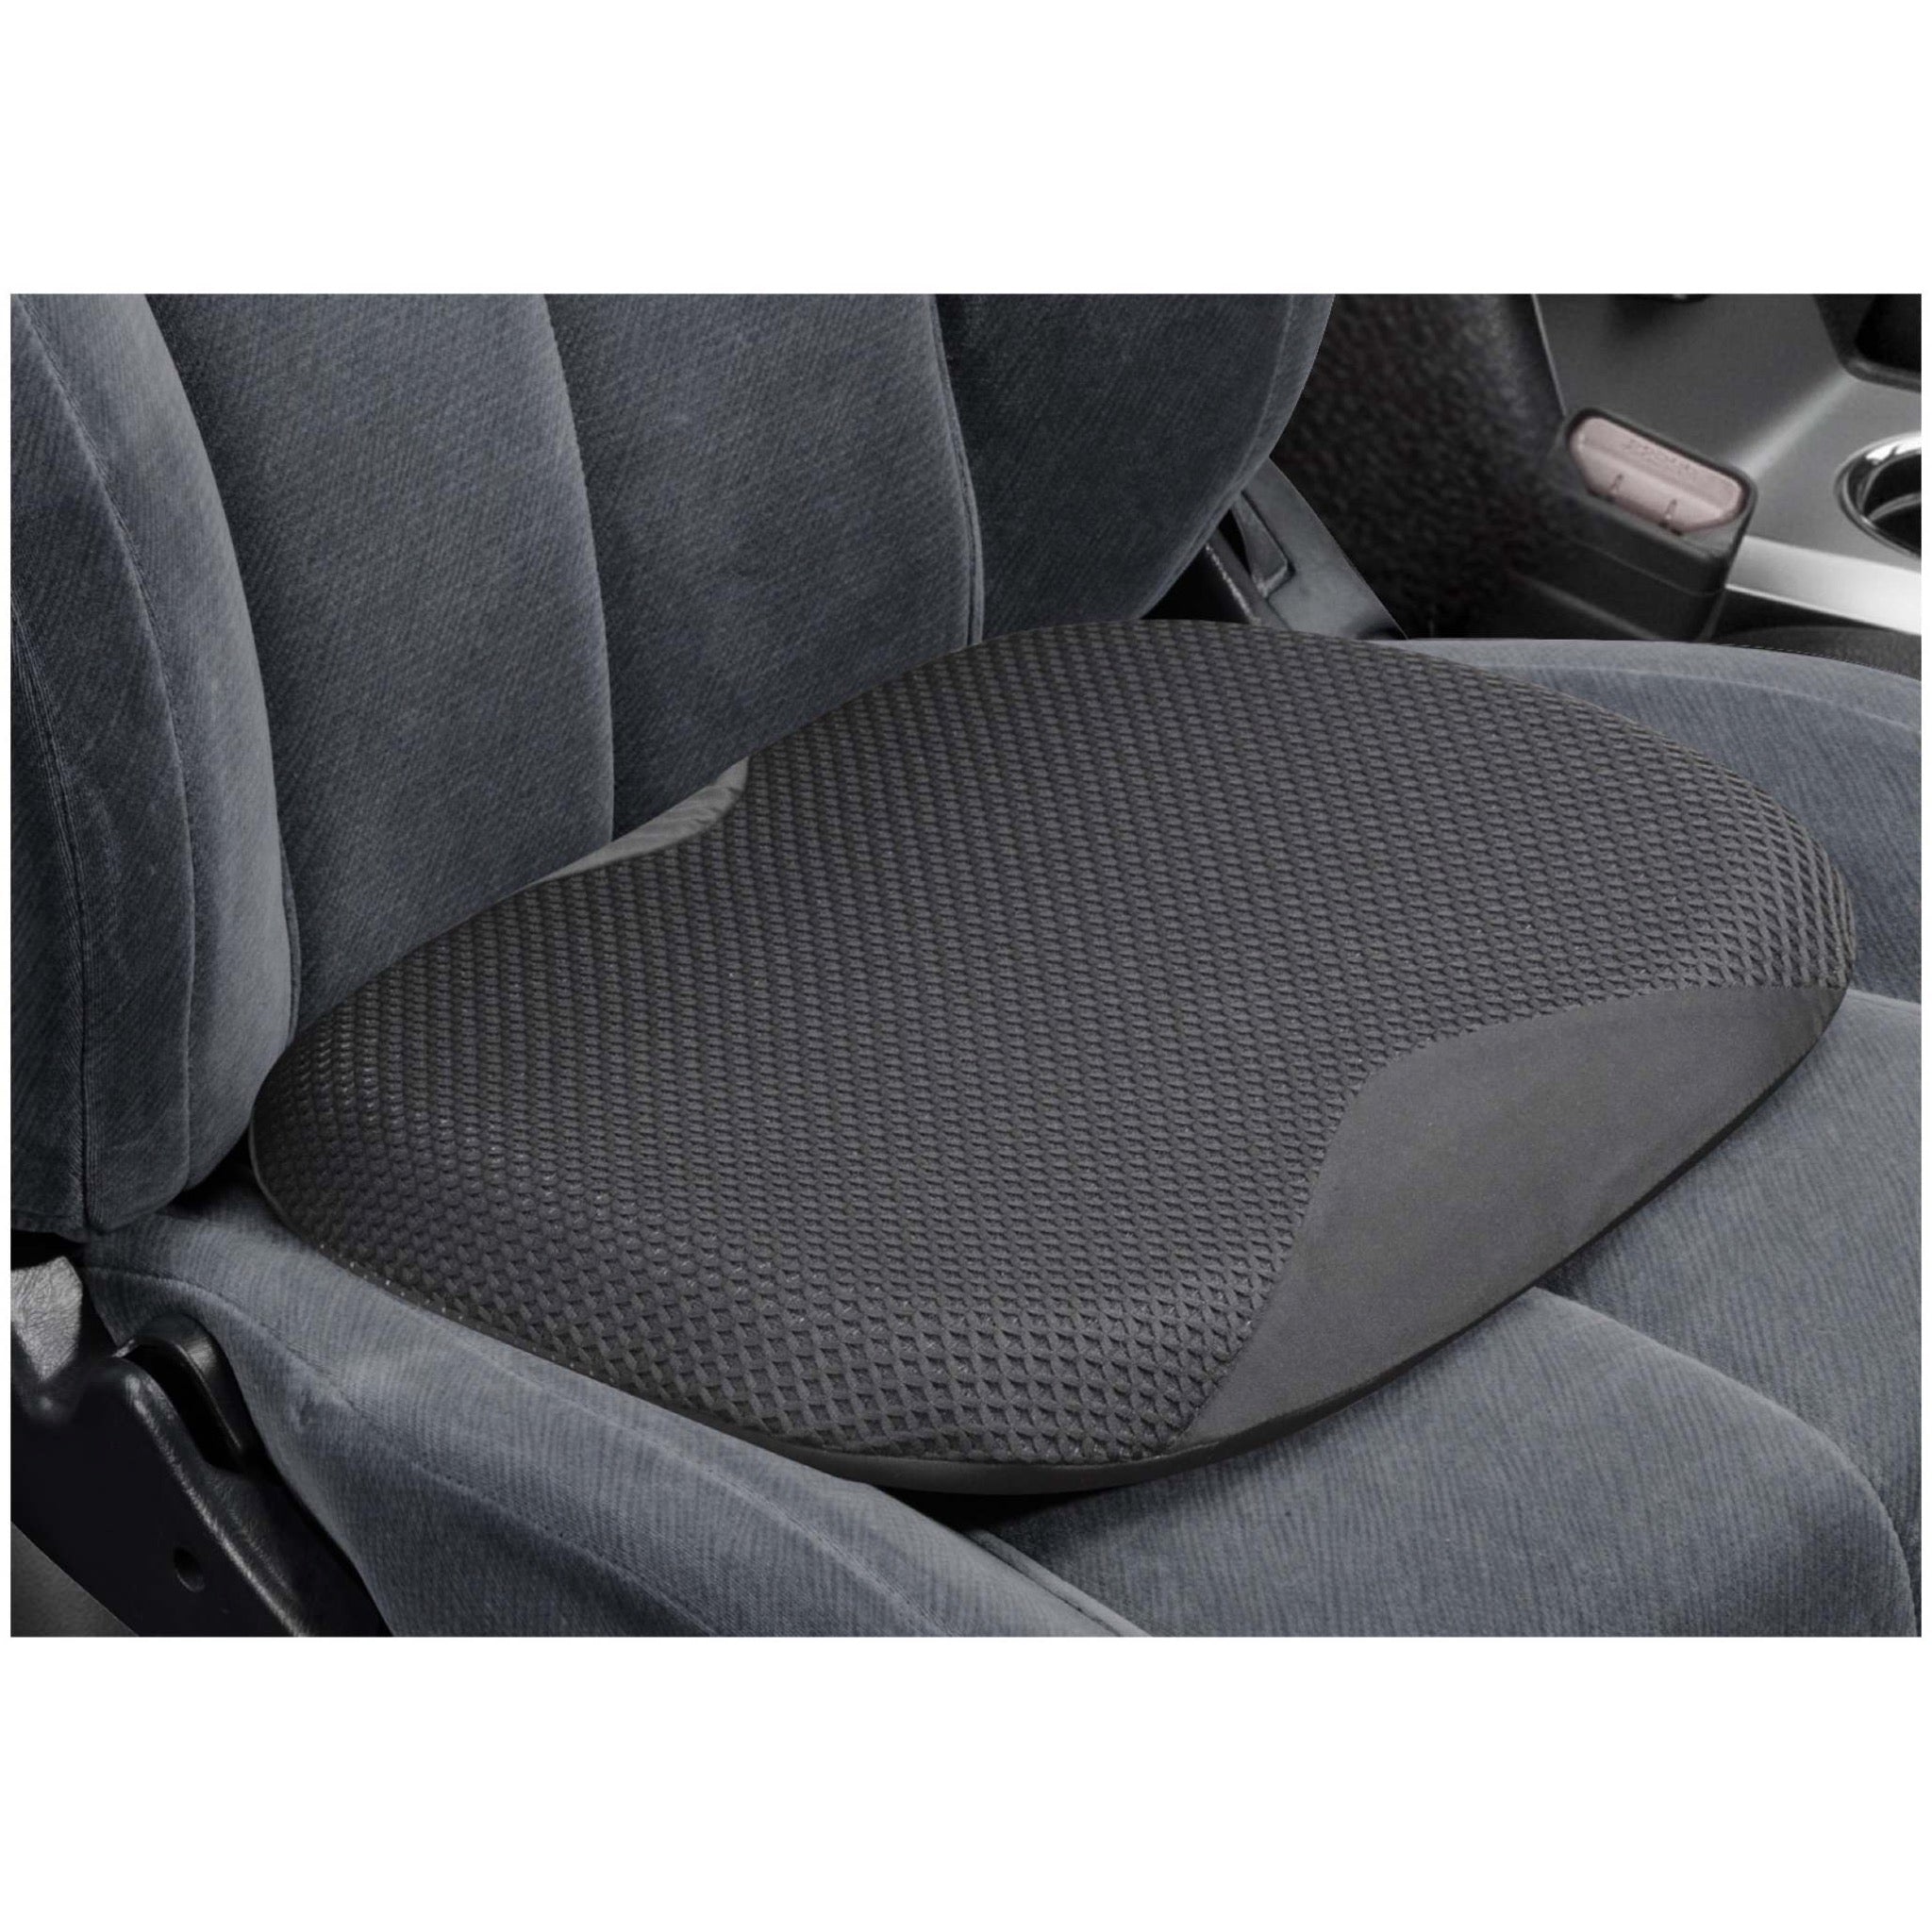 Infused Gel Comfort Cushion - Type S Auto